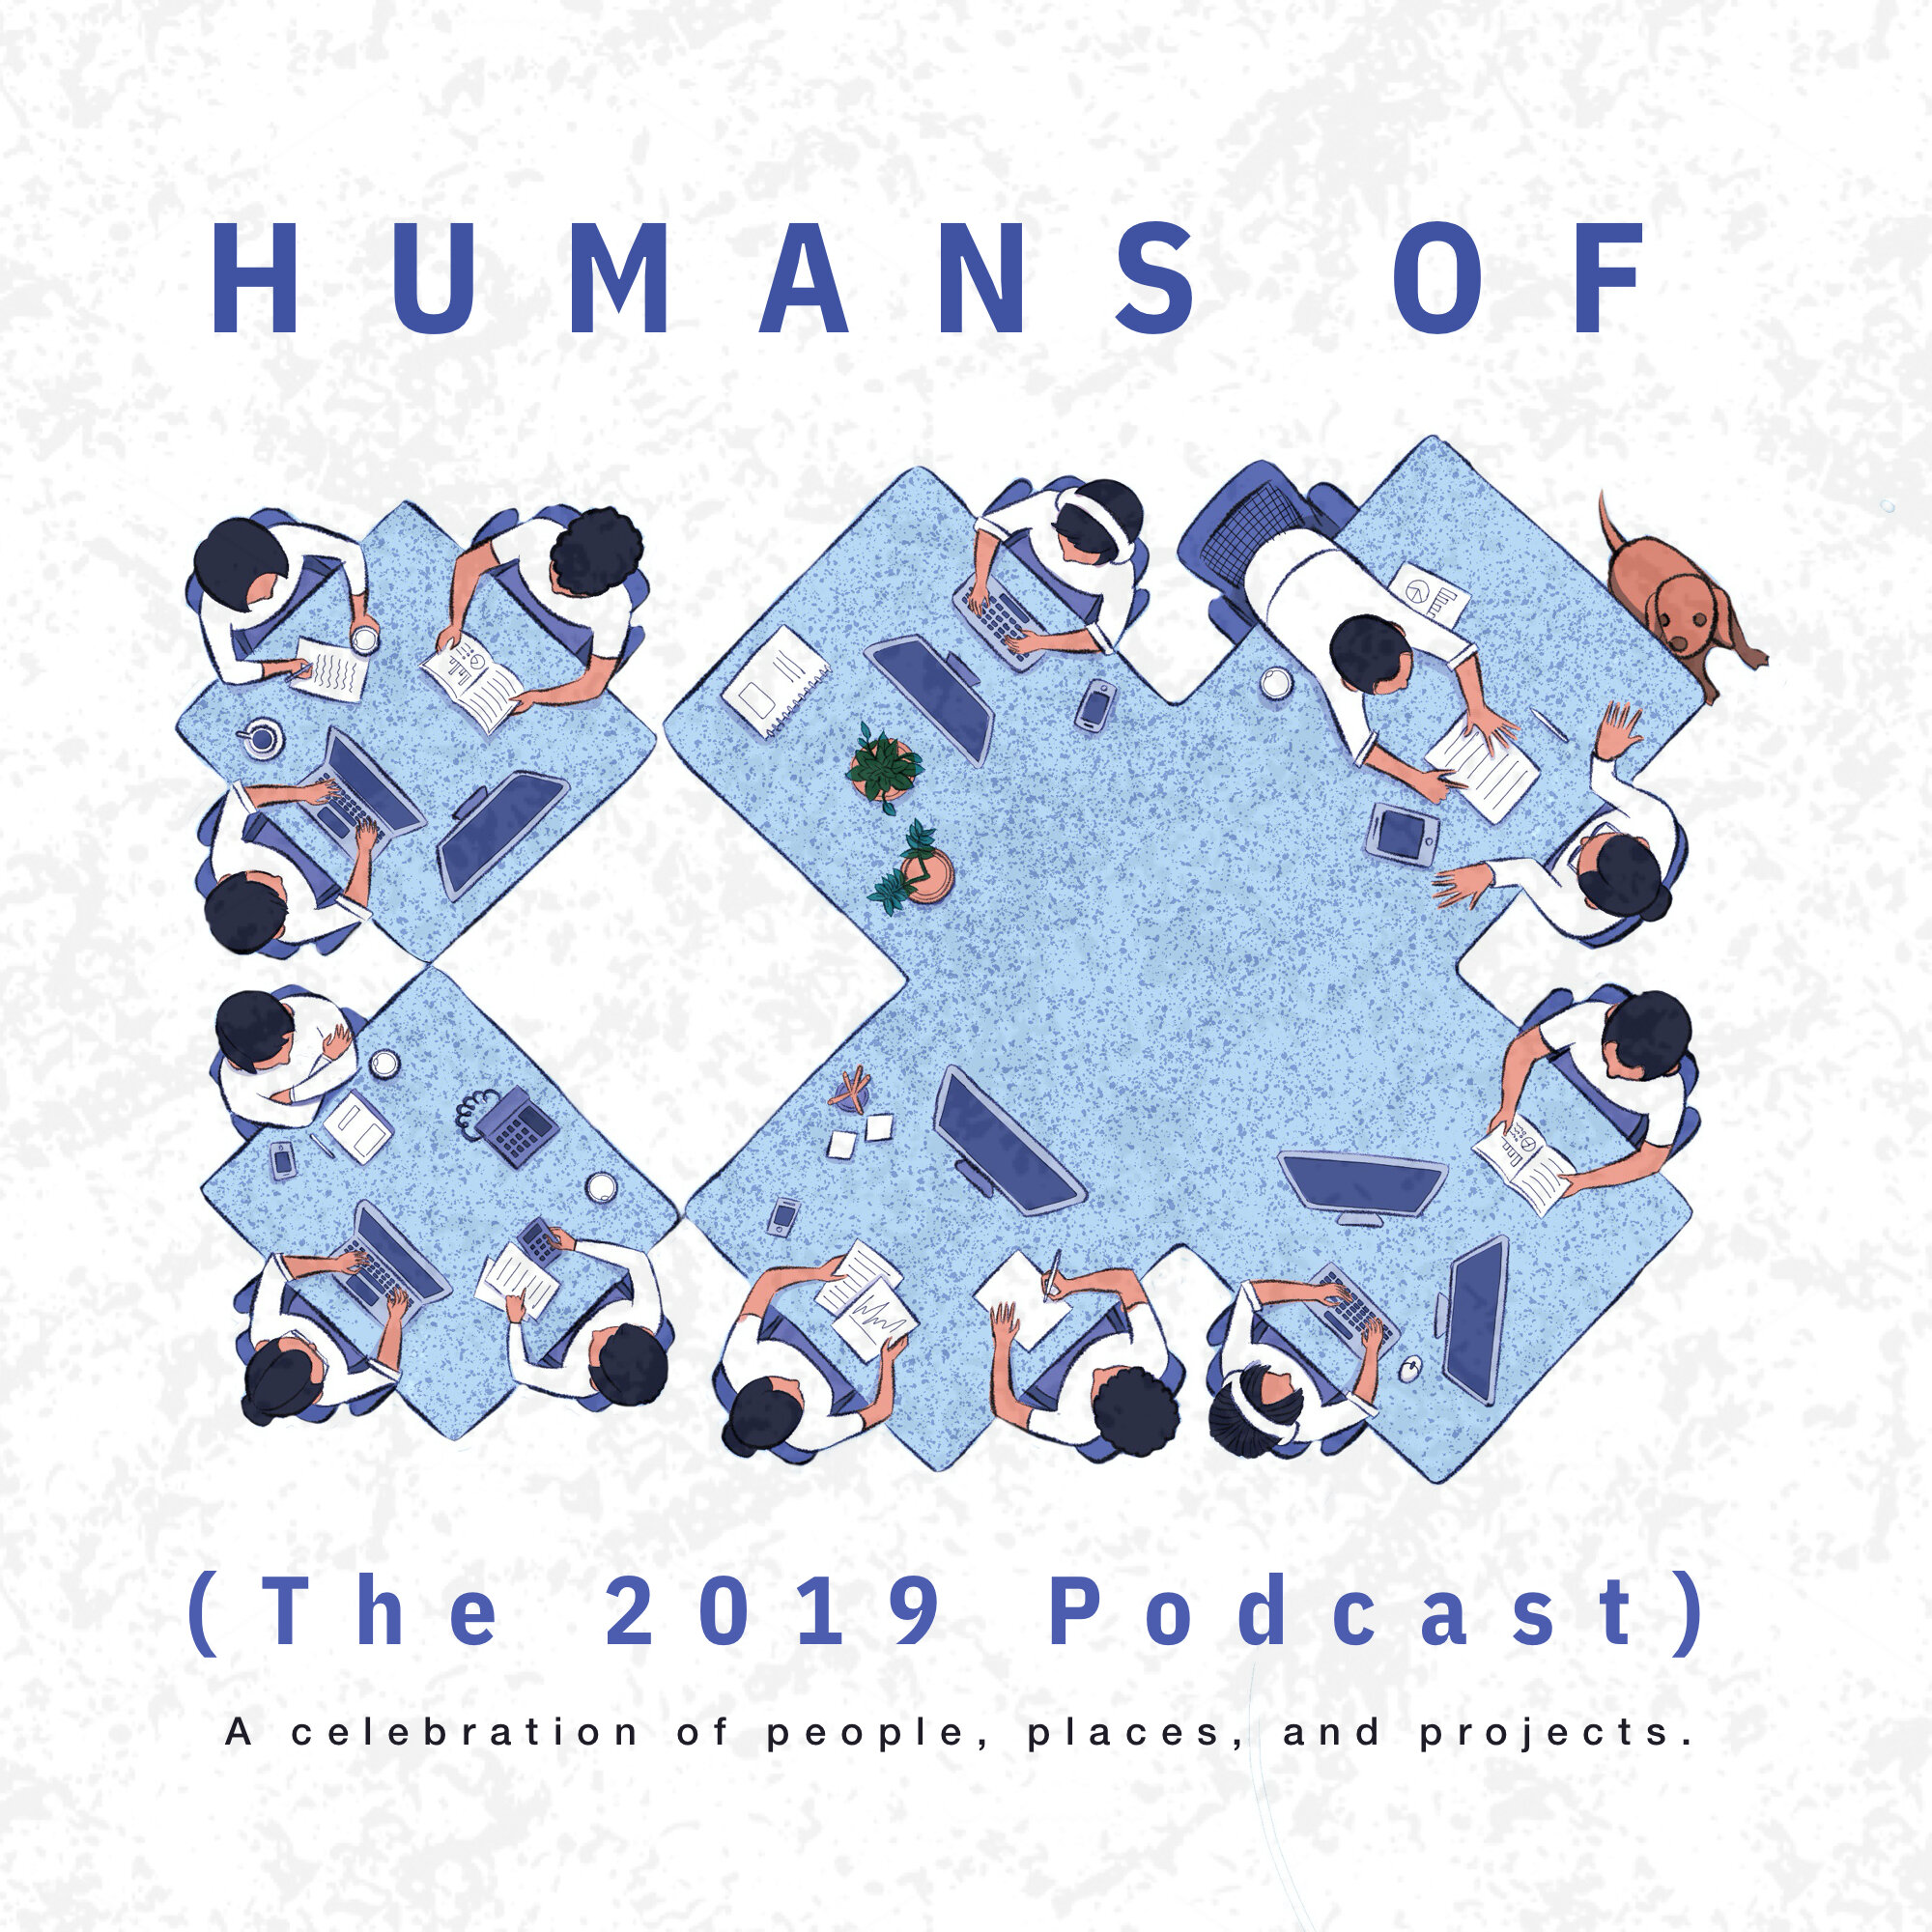 Humans of iX Podcast Cover 